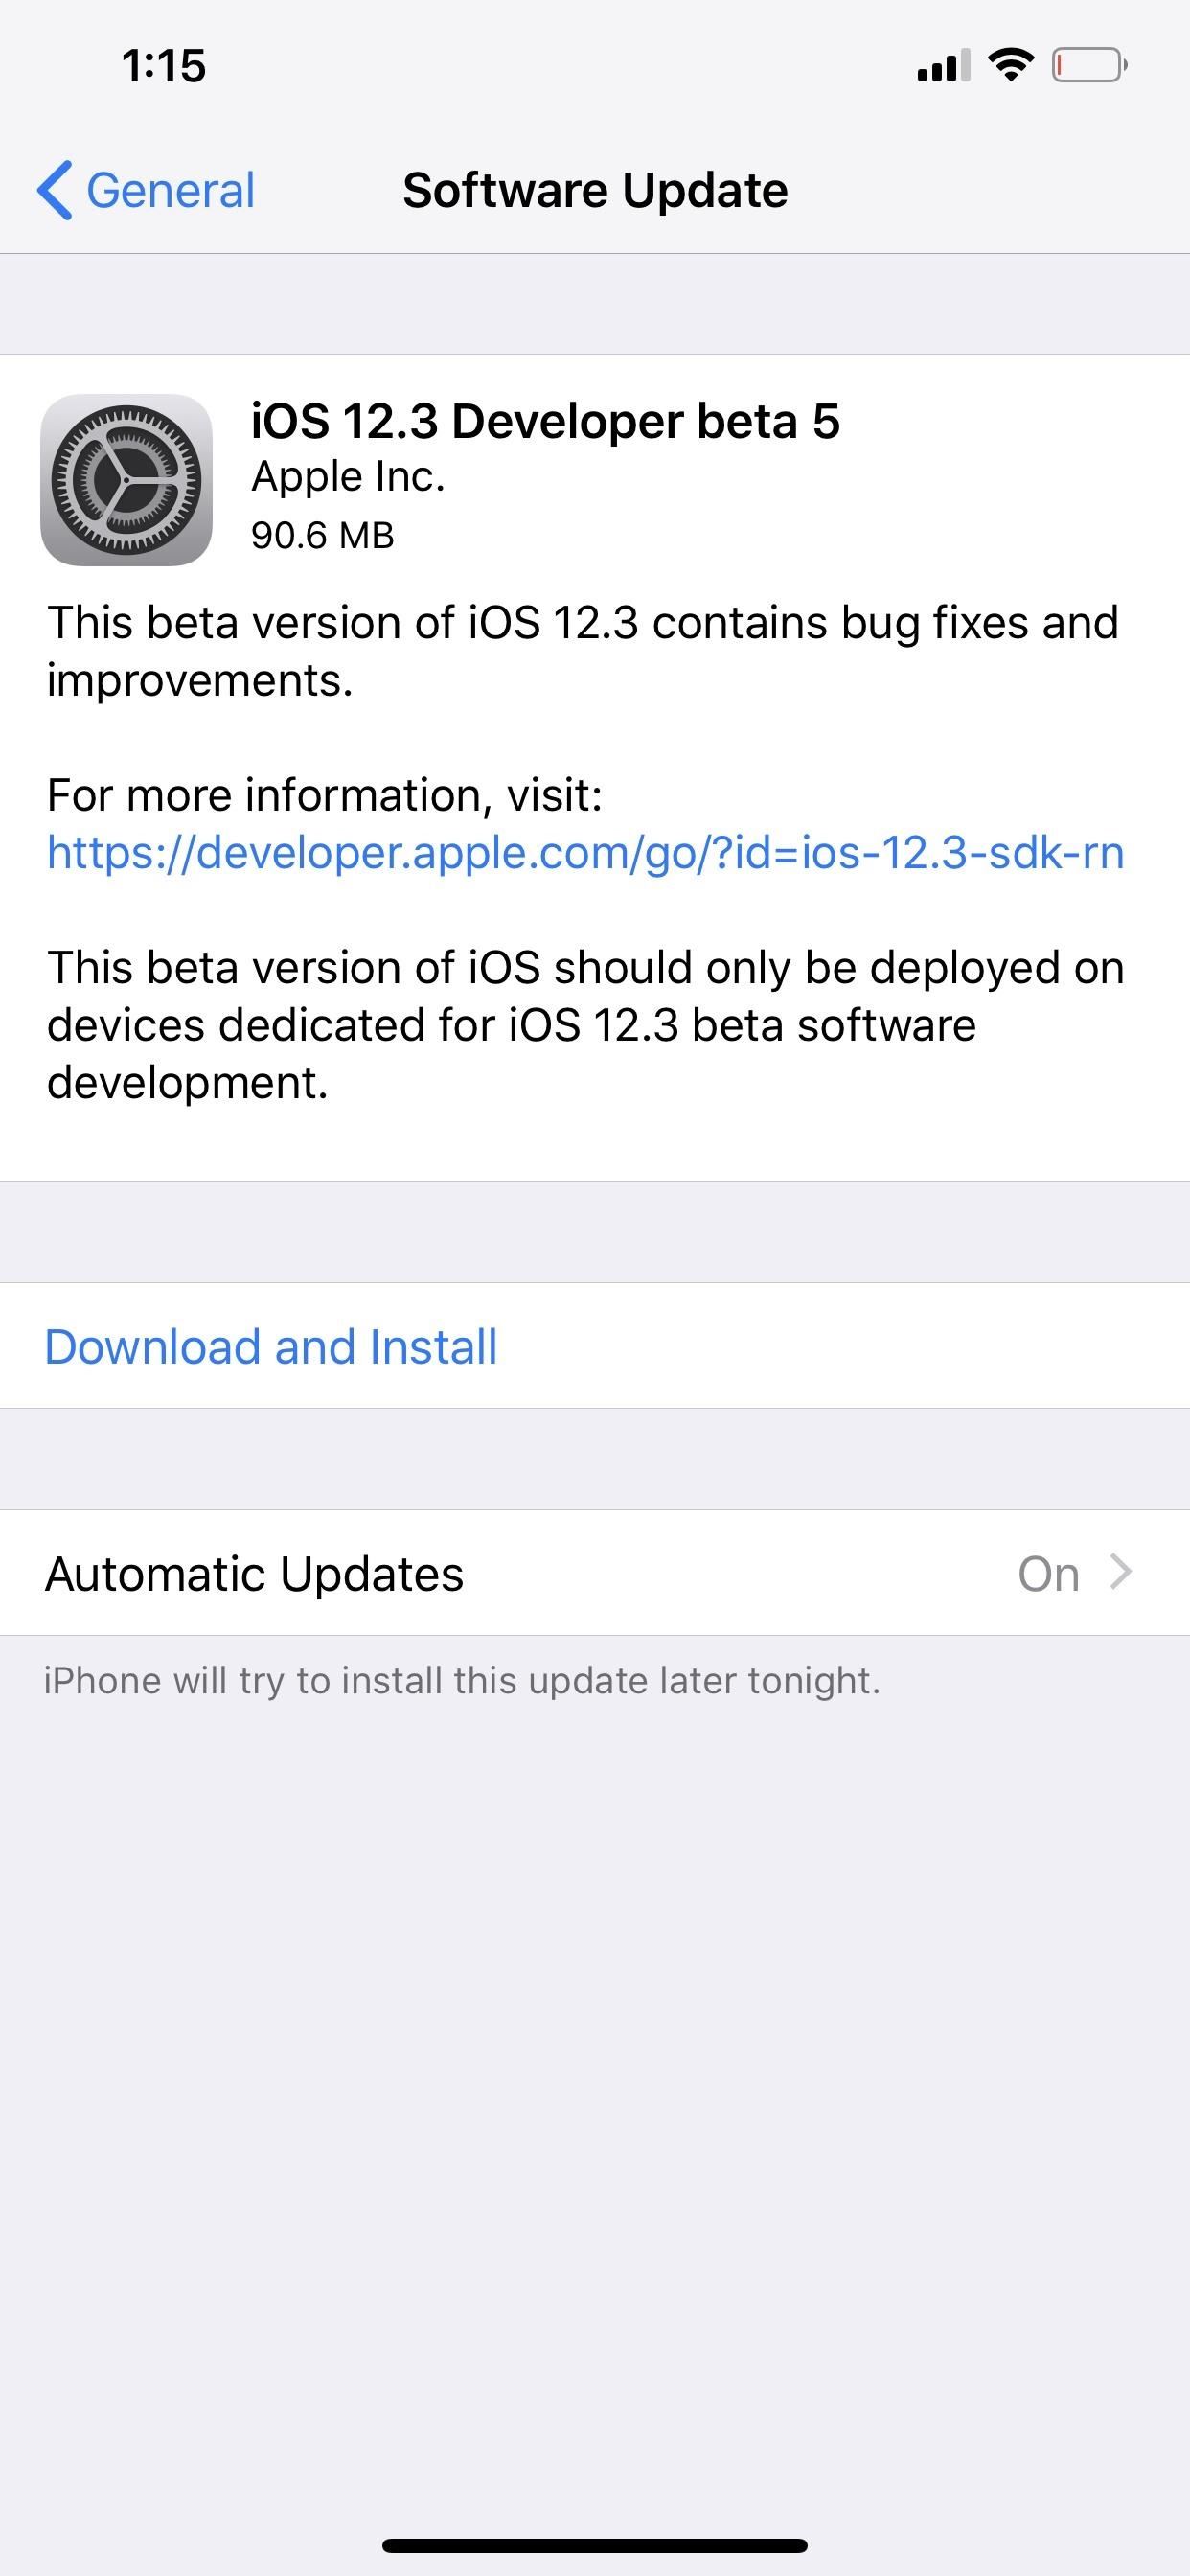 Apple Releases iOS 12.3 Beta 5 for iPhone to Developers